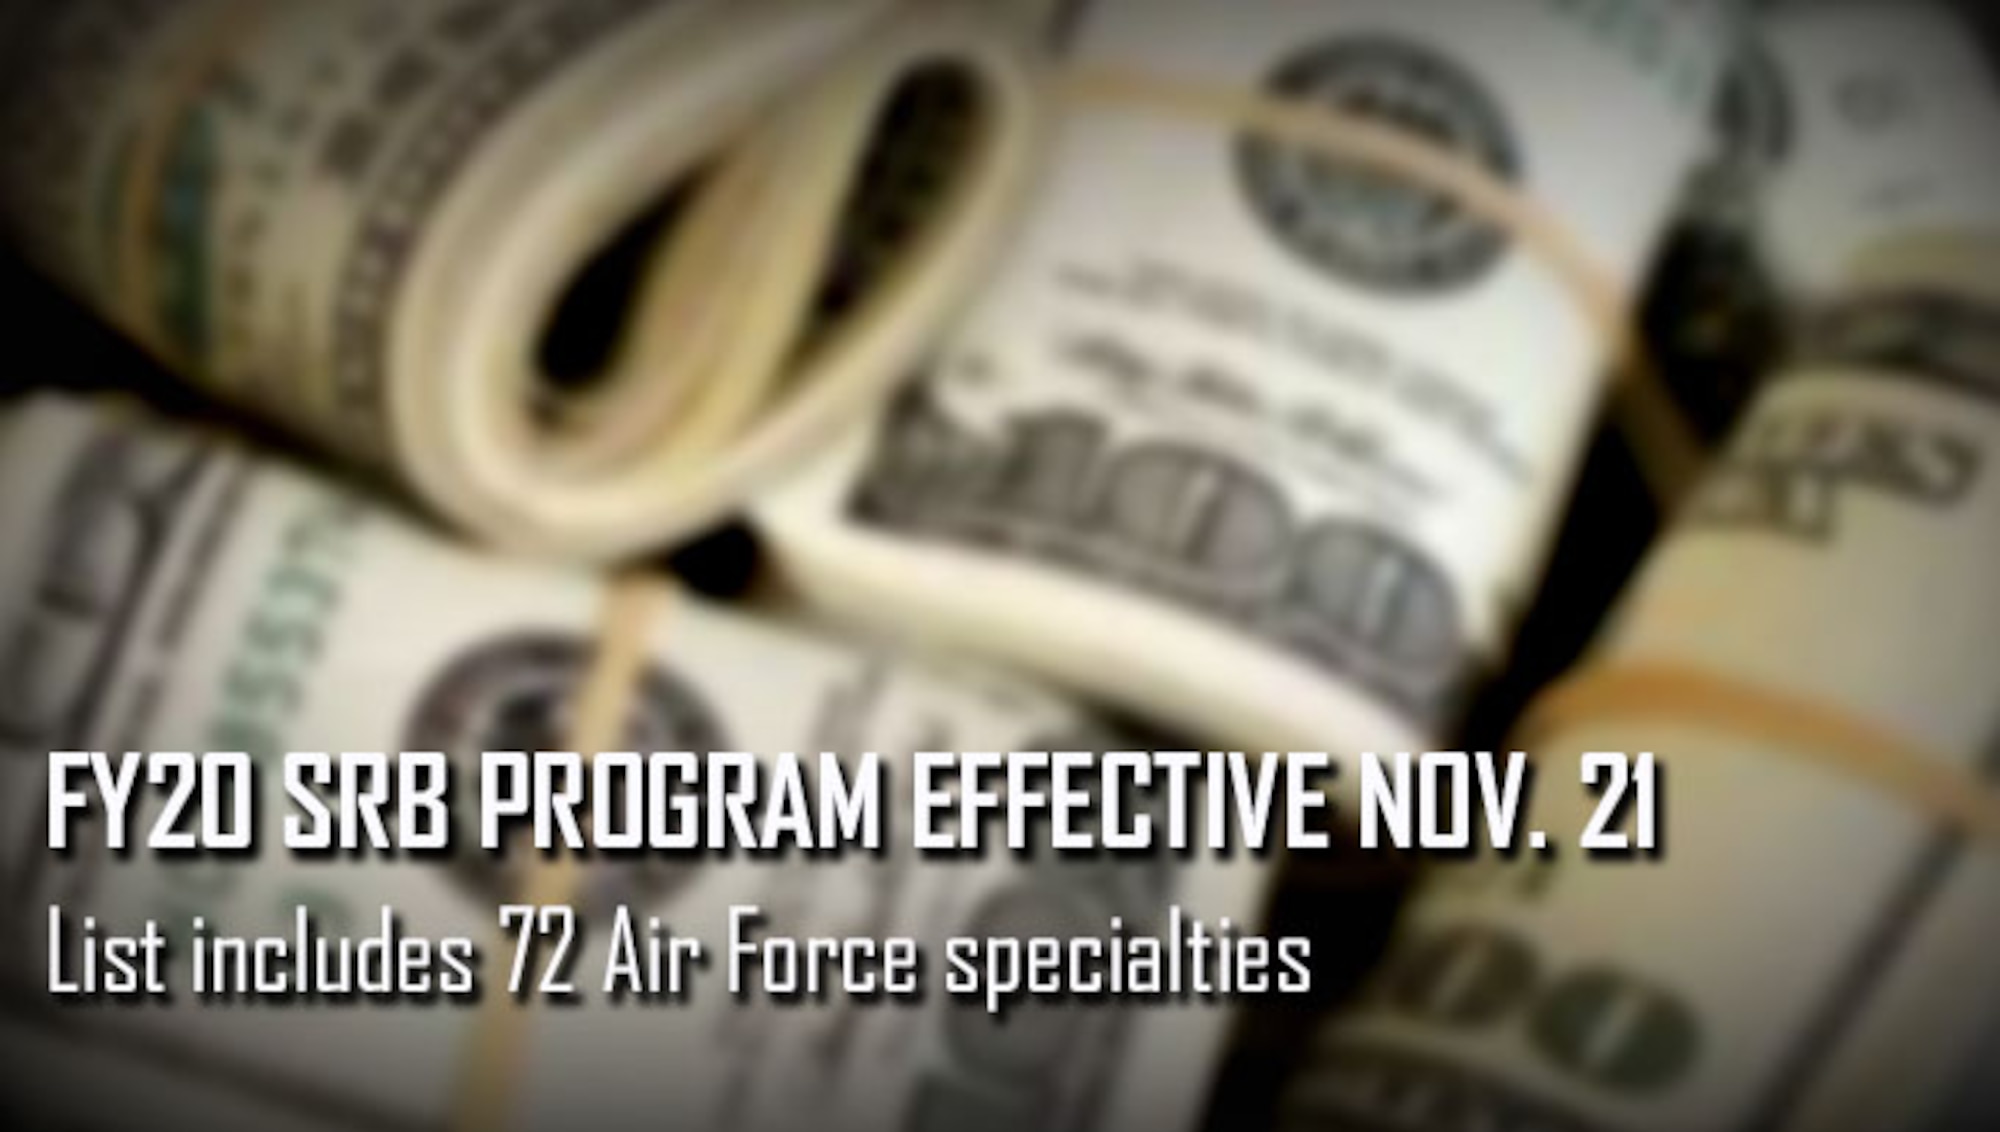 Air Force officials released details Nov. 20 on the fiscal year 2020 Selective Retention Bonus program, which includes 72 eligible Air Force specialties.